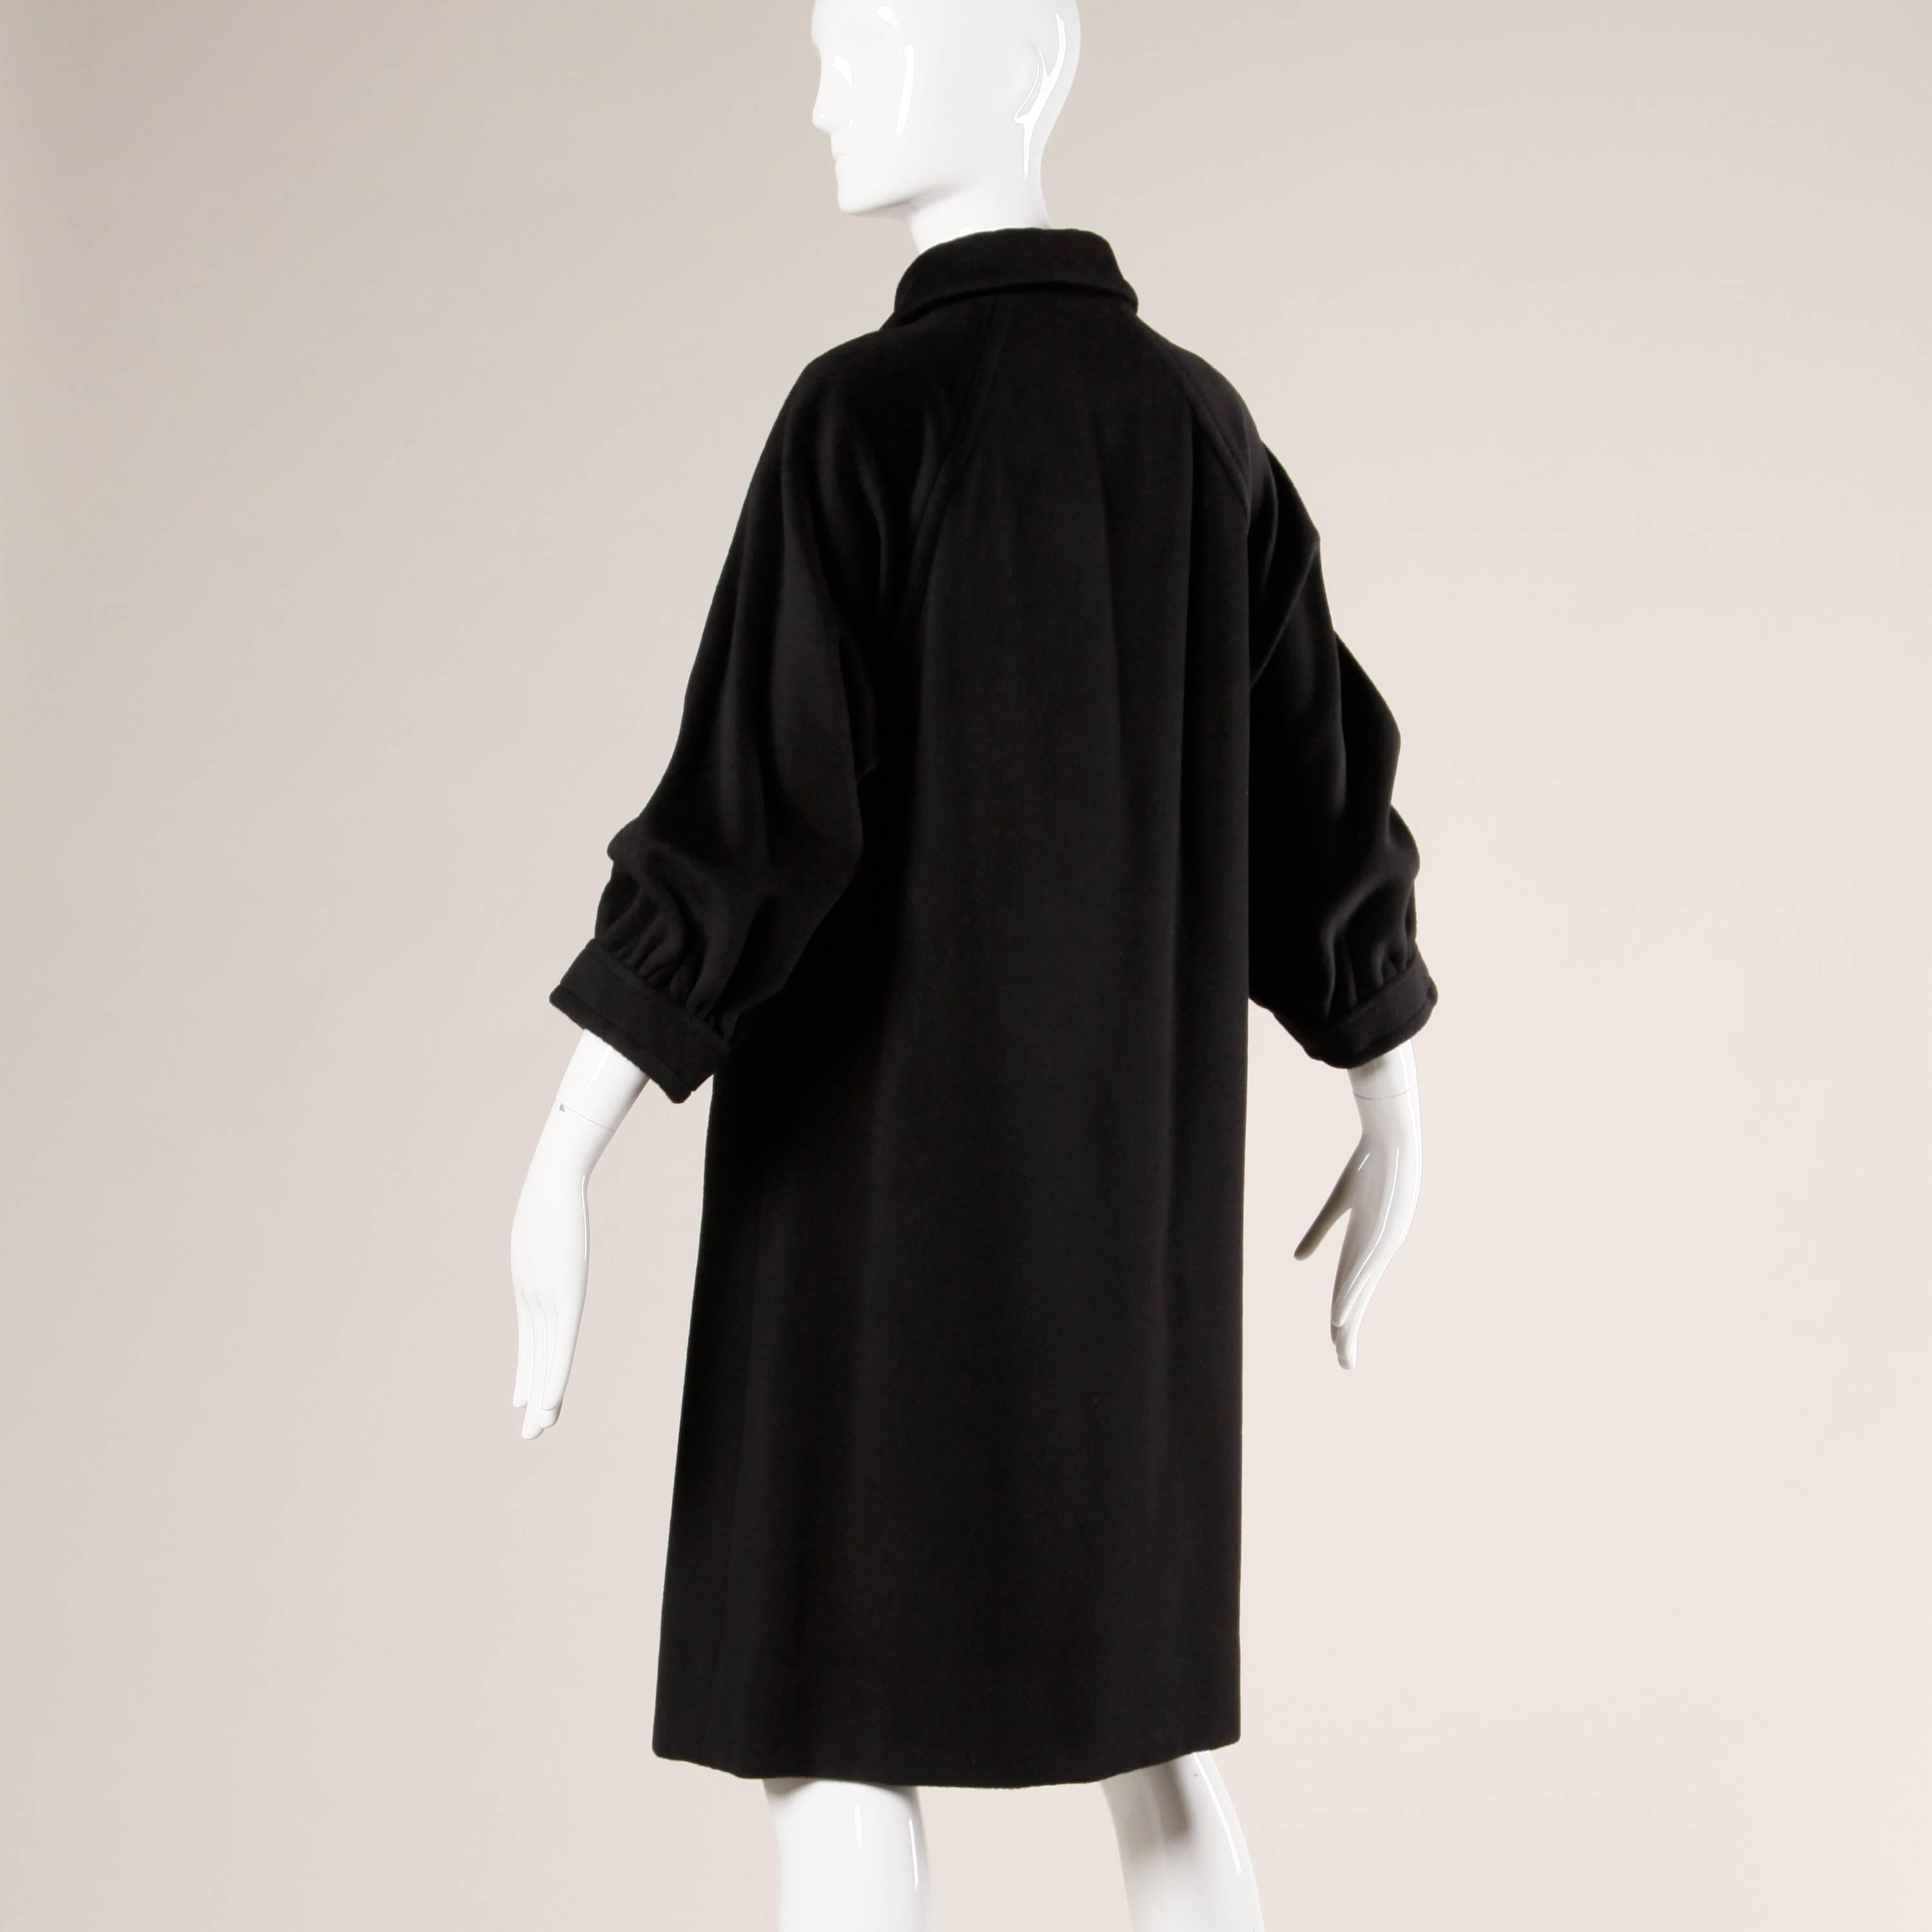 Galanos Minimalist Vintage Charcoal Gray Cashmere Coat with Slit Pockets In Excellent Condition For Sale In Sparks, NV